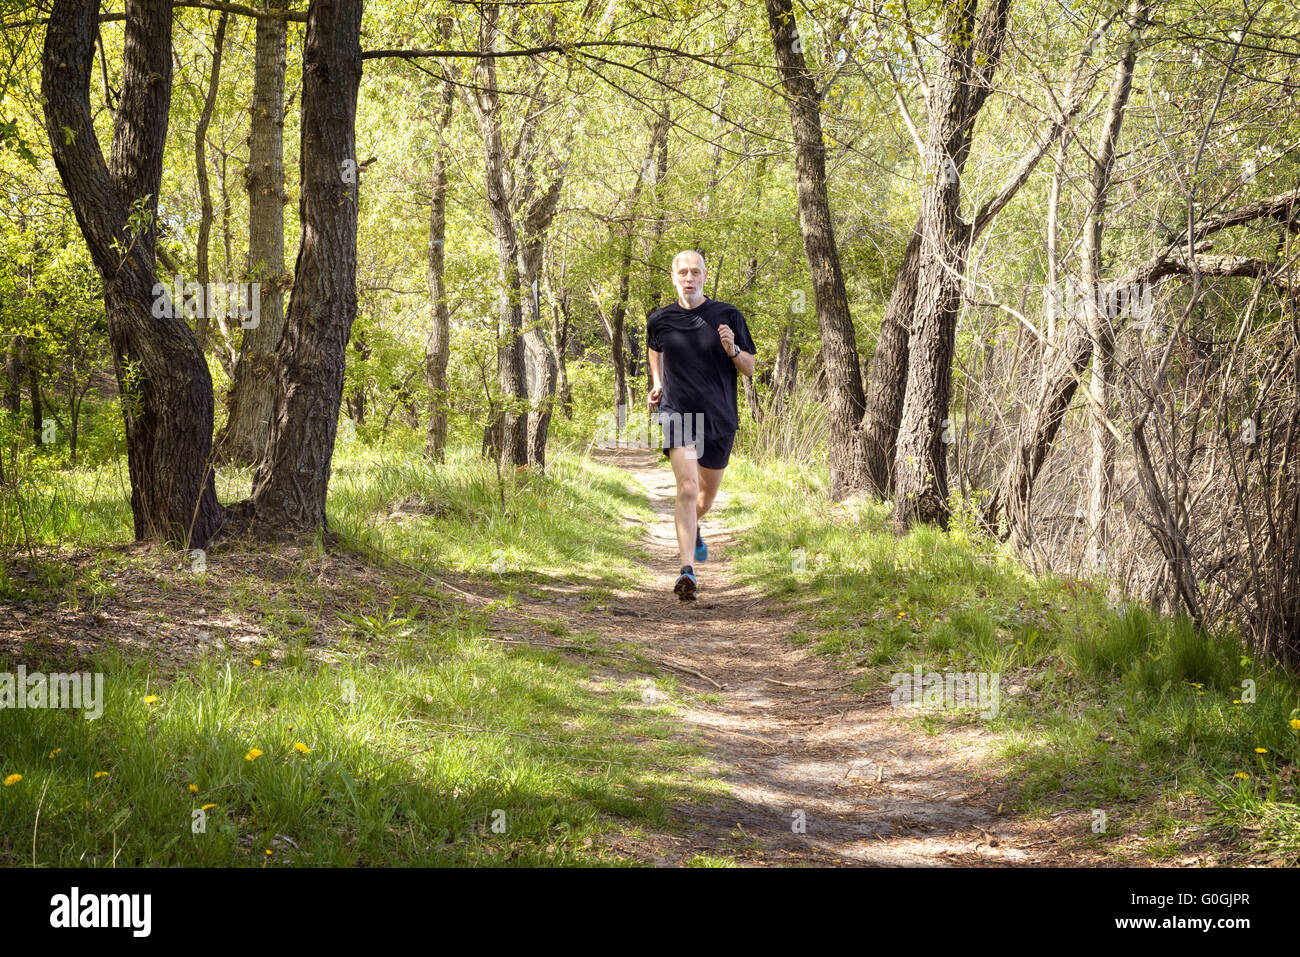 A senior man worn in black is running in the forest during a warm spring day Stock Photo